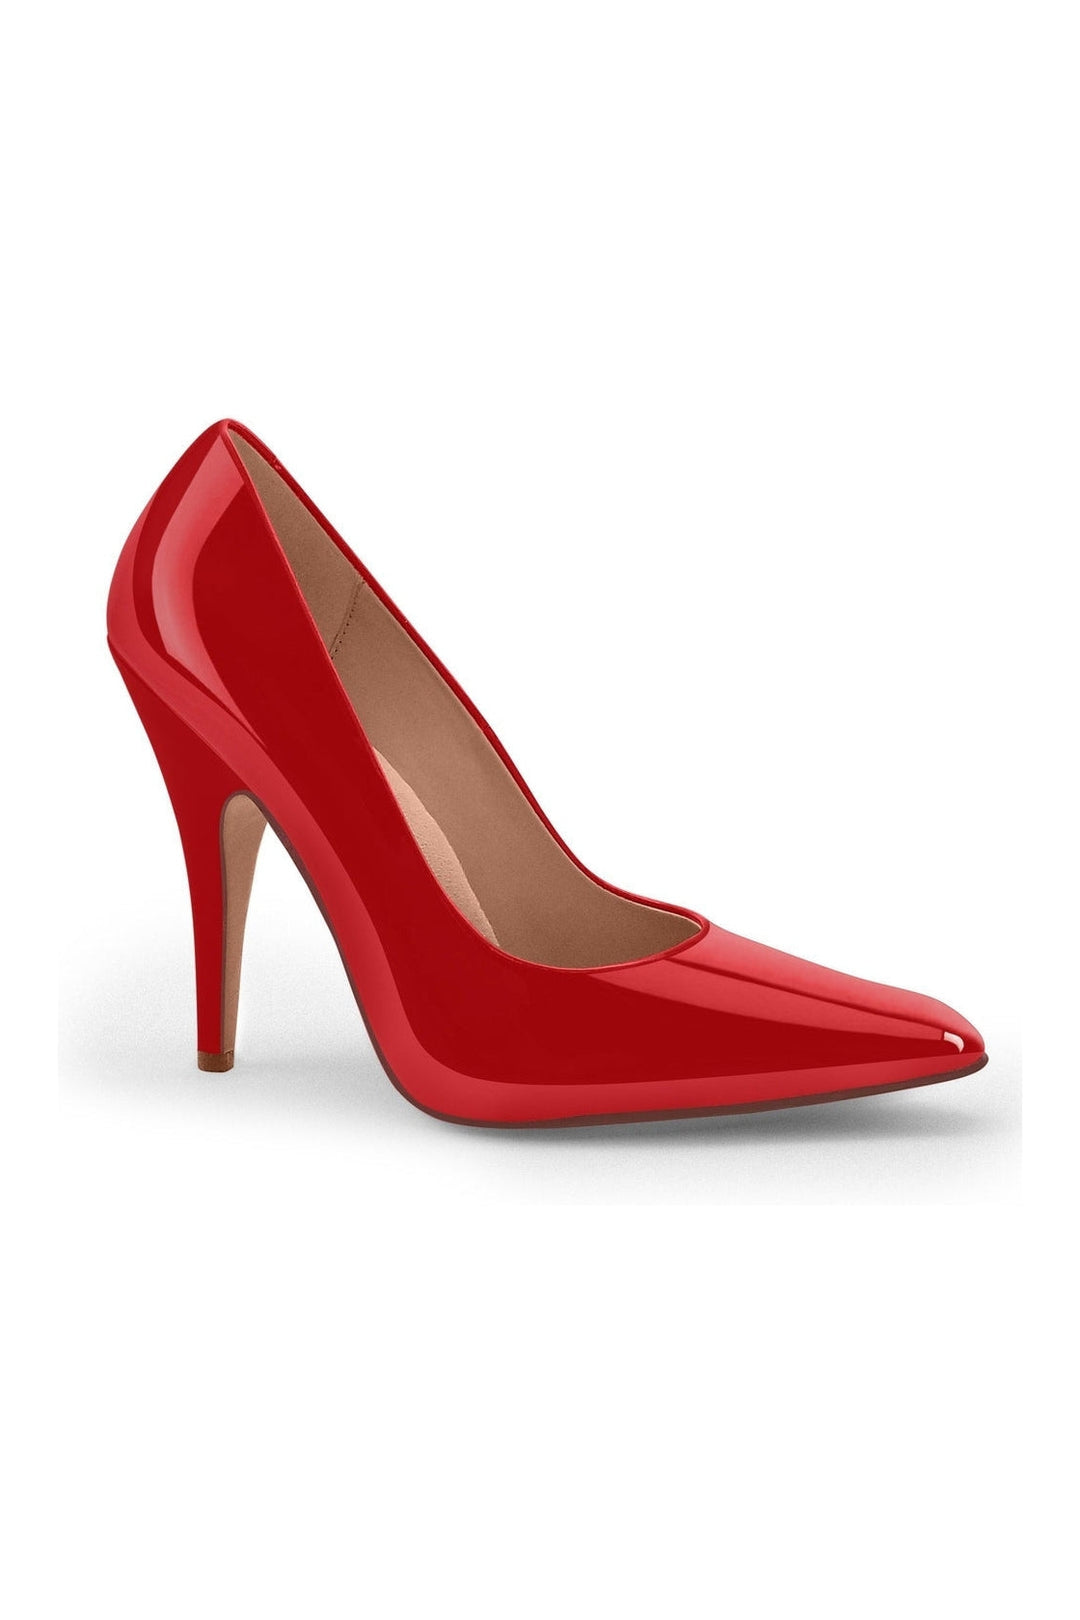 Classic Sexy Pump-Pumps-Sexyshoes Signature-Red-SEXYSHOES.COM